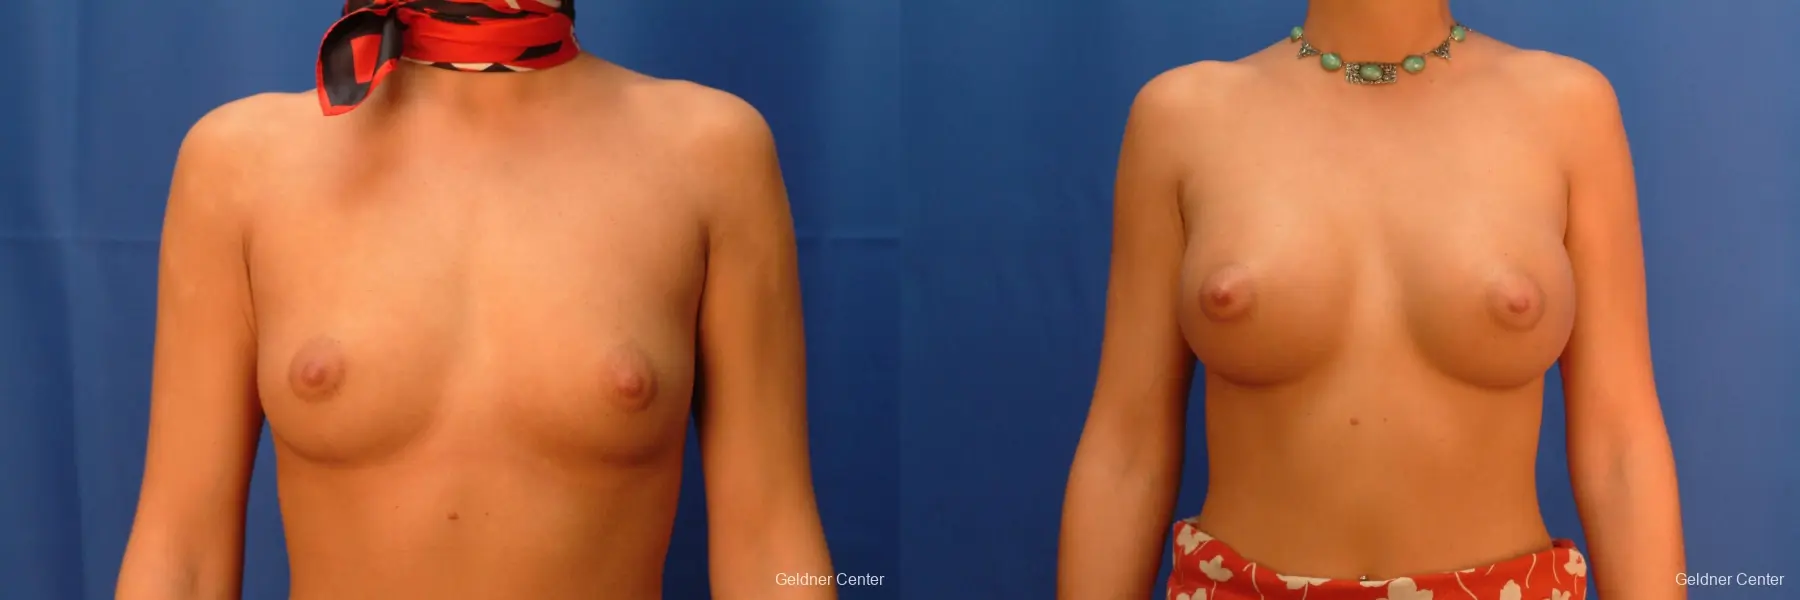 Breast Augmentation Hinsdale, Chicago 2438 - Before and After 1